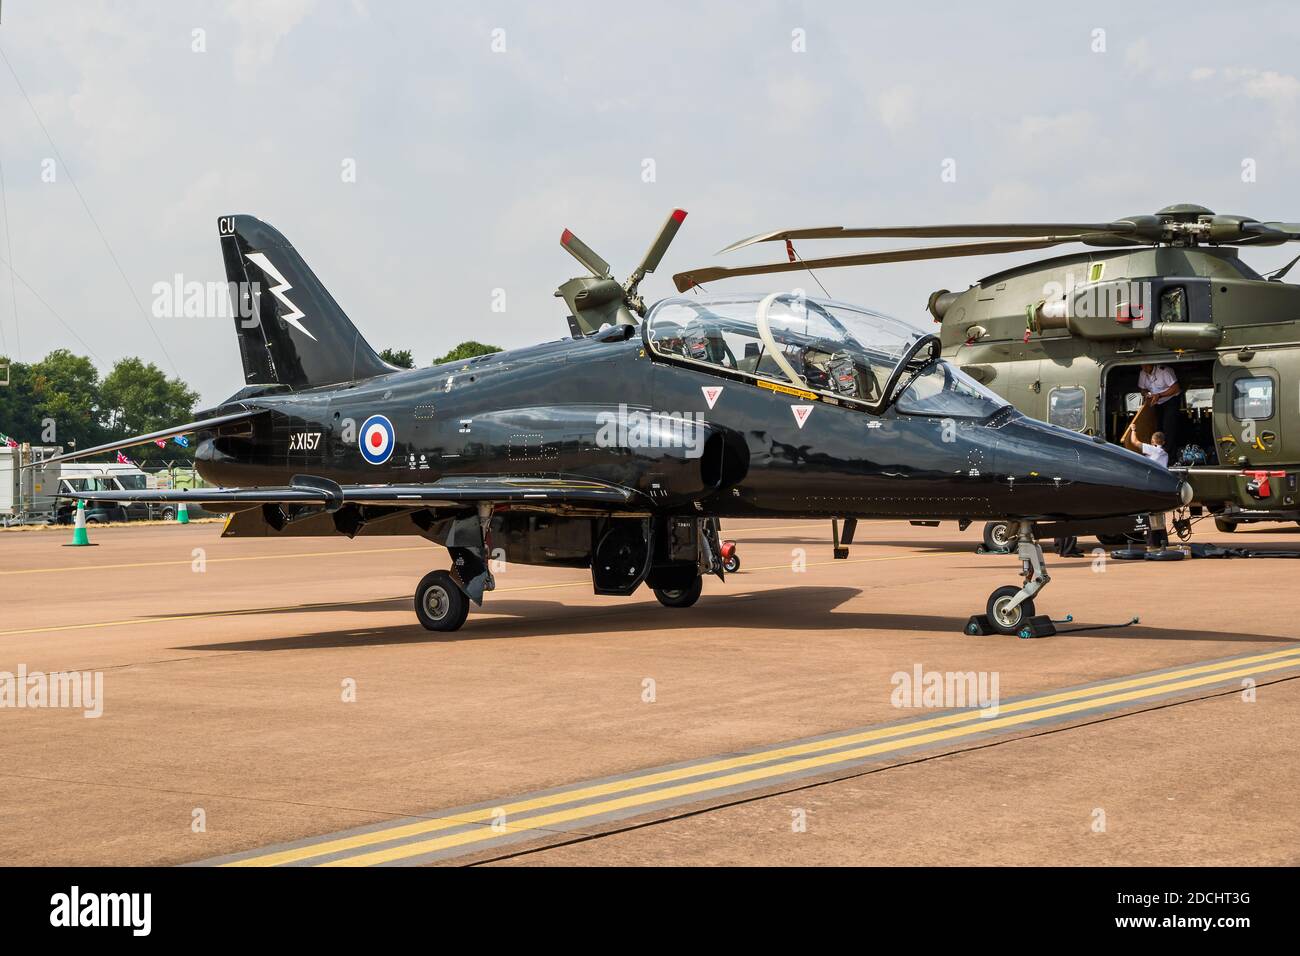 Royal Air Force Hawk T1 trainer jet on the tarmac of RAF Fairford. UK - July 13, 2018 Stock Photo